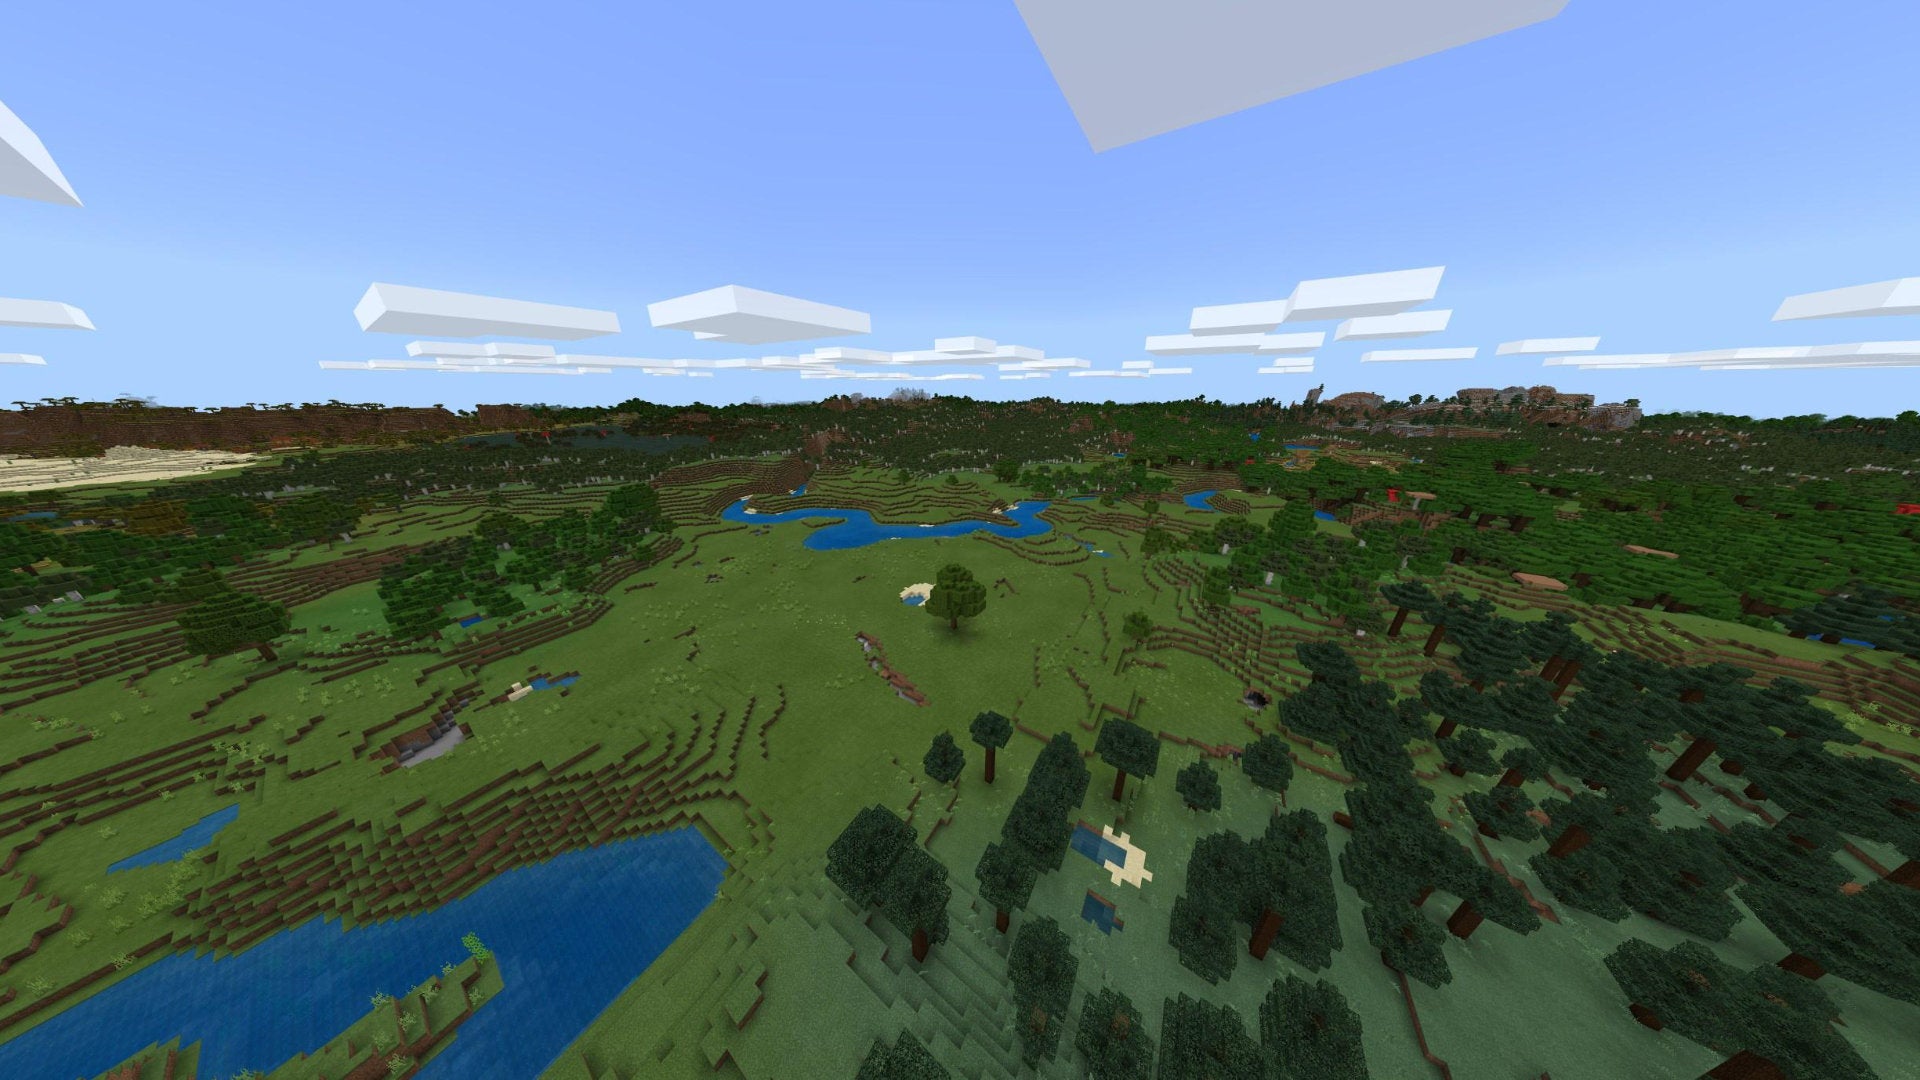 A Minecraft Bedrock screenshot of a new world created with the seed -433664663.